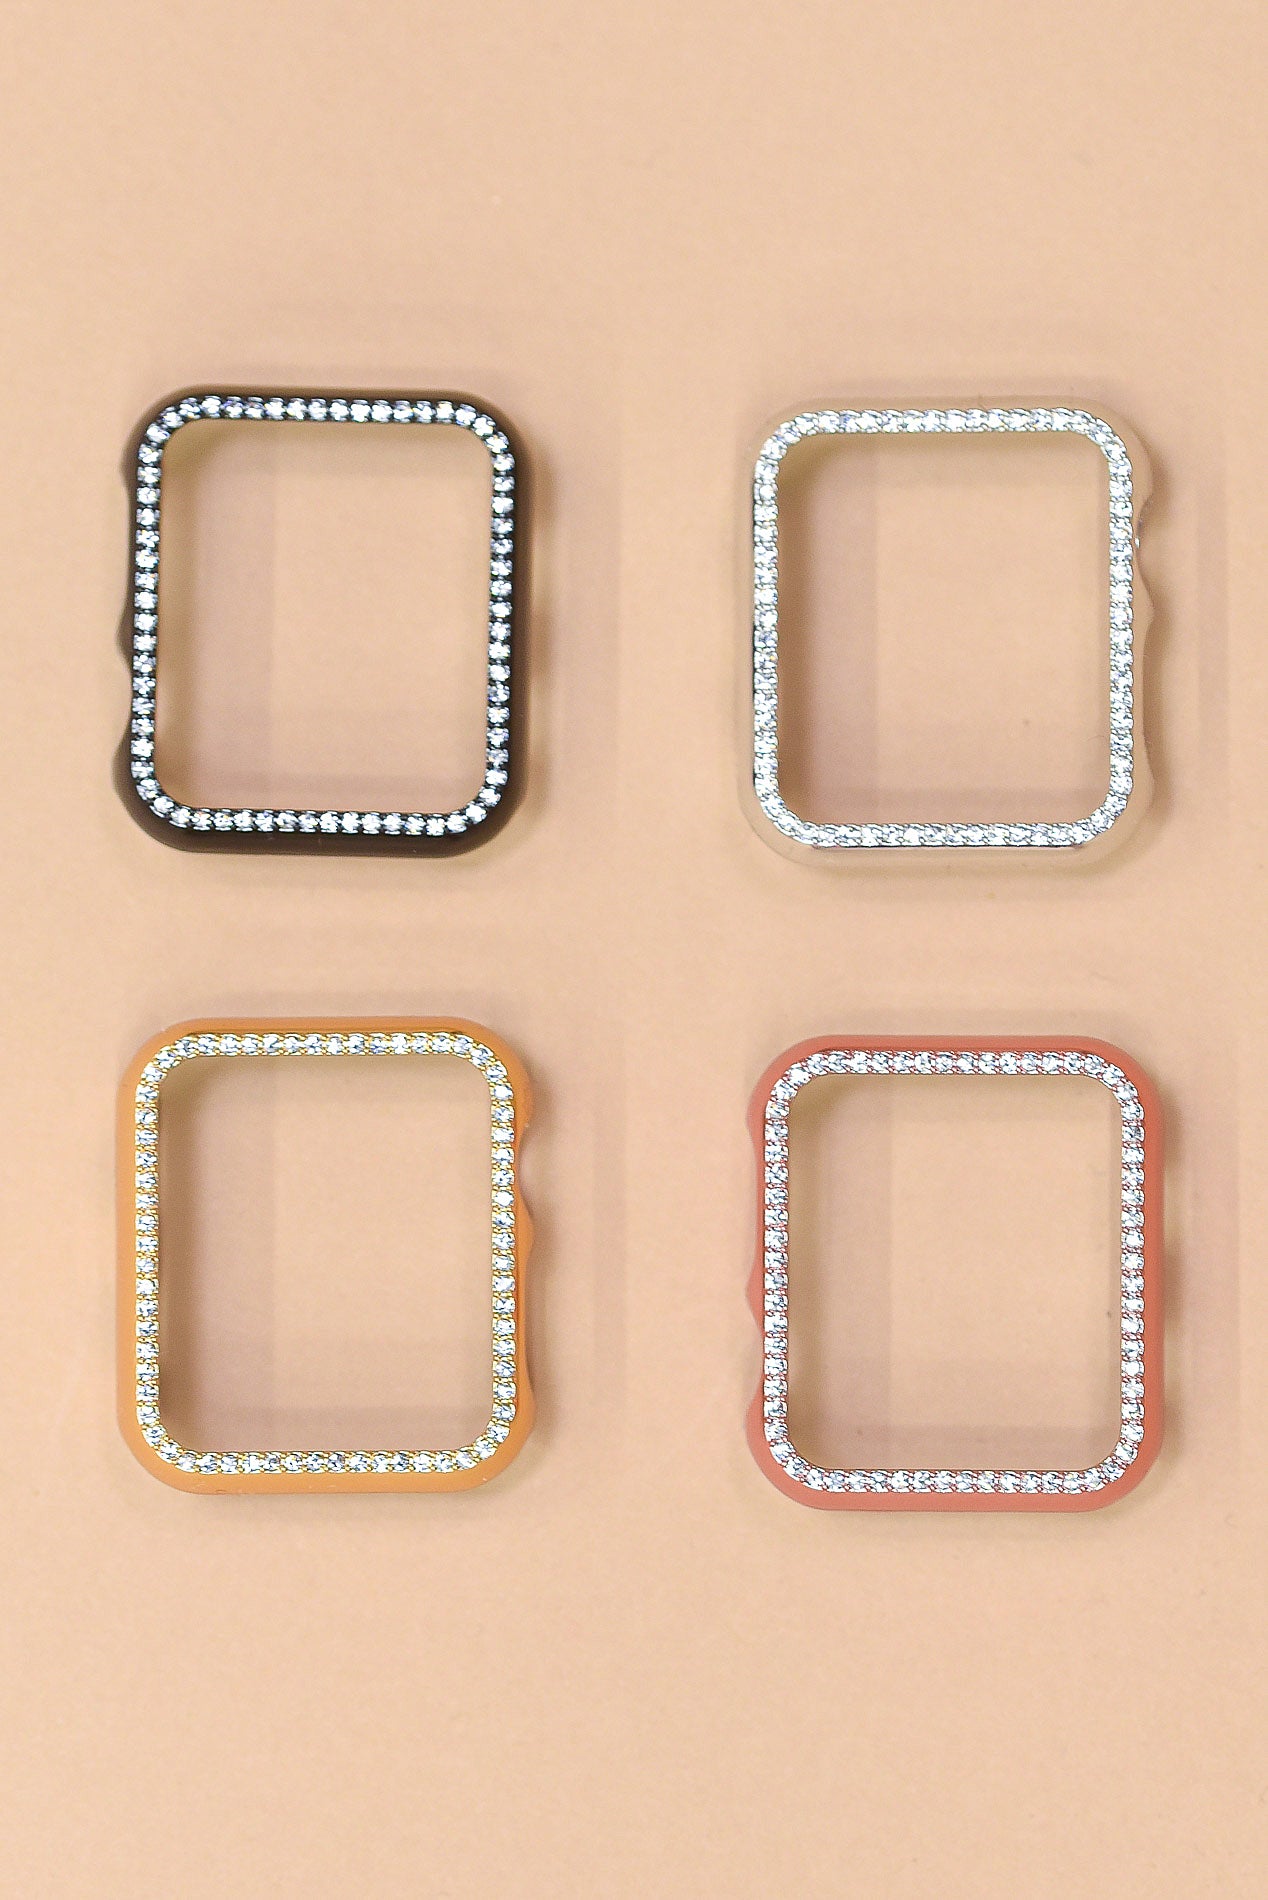 Apple Watchband Bling Face Cover (38MM) - WB031